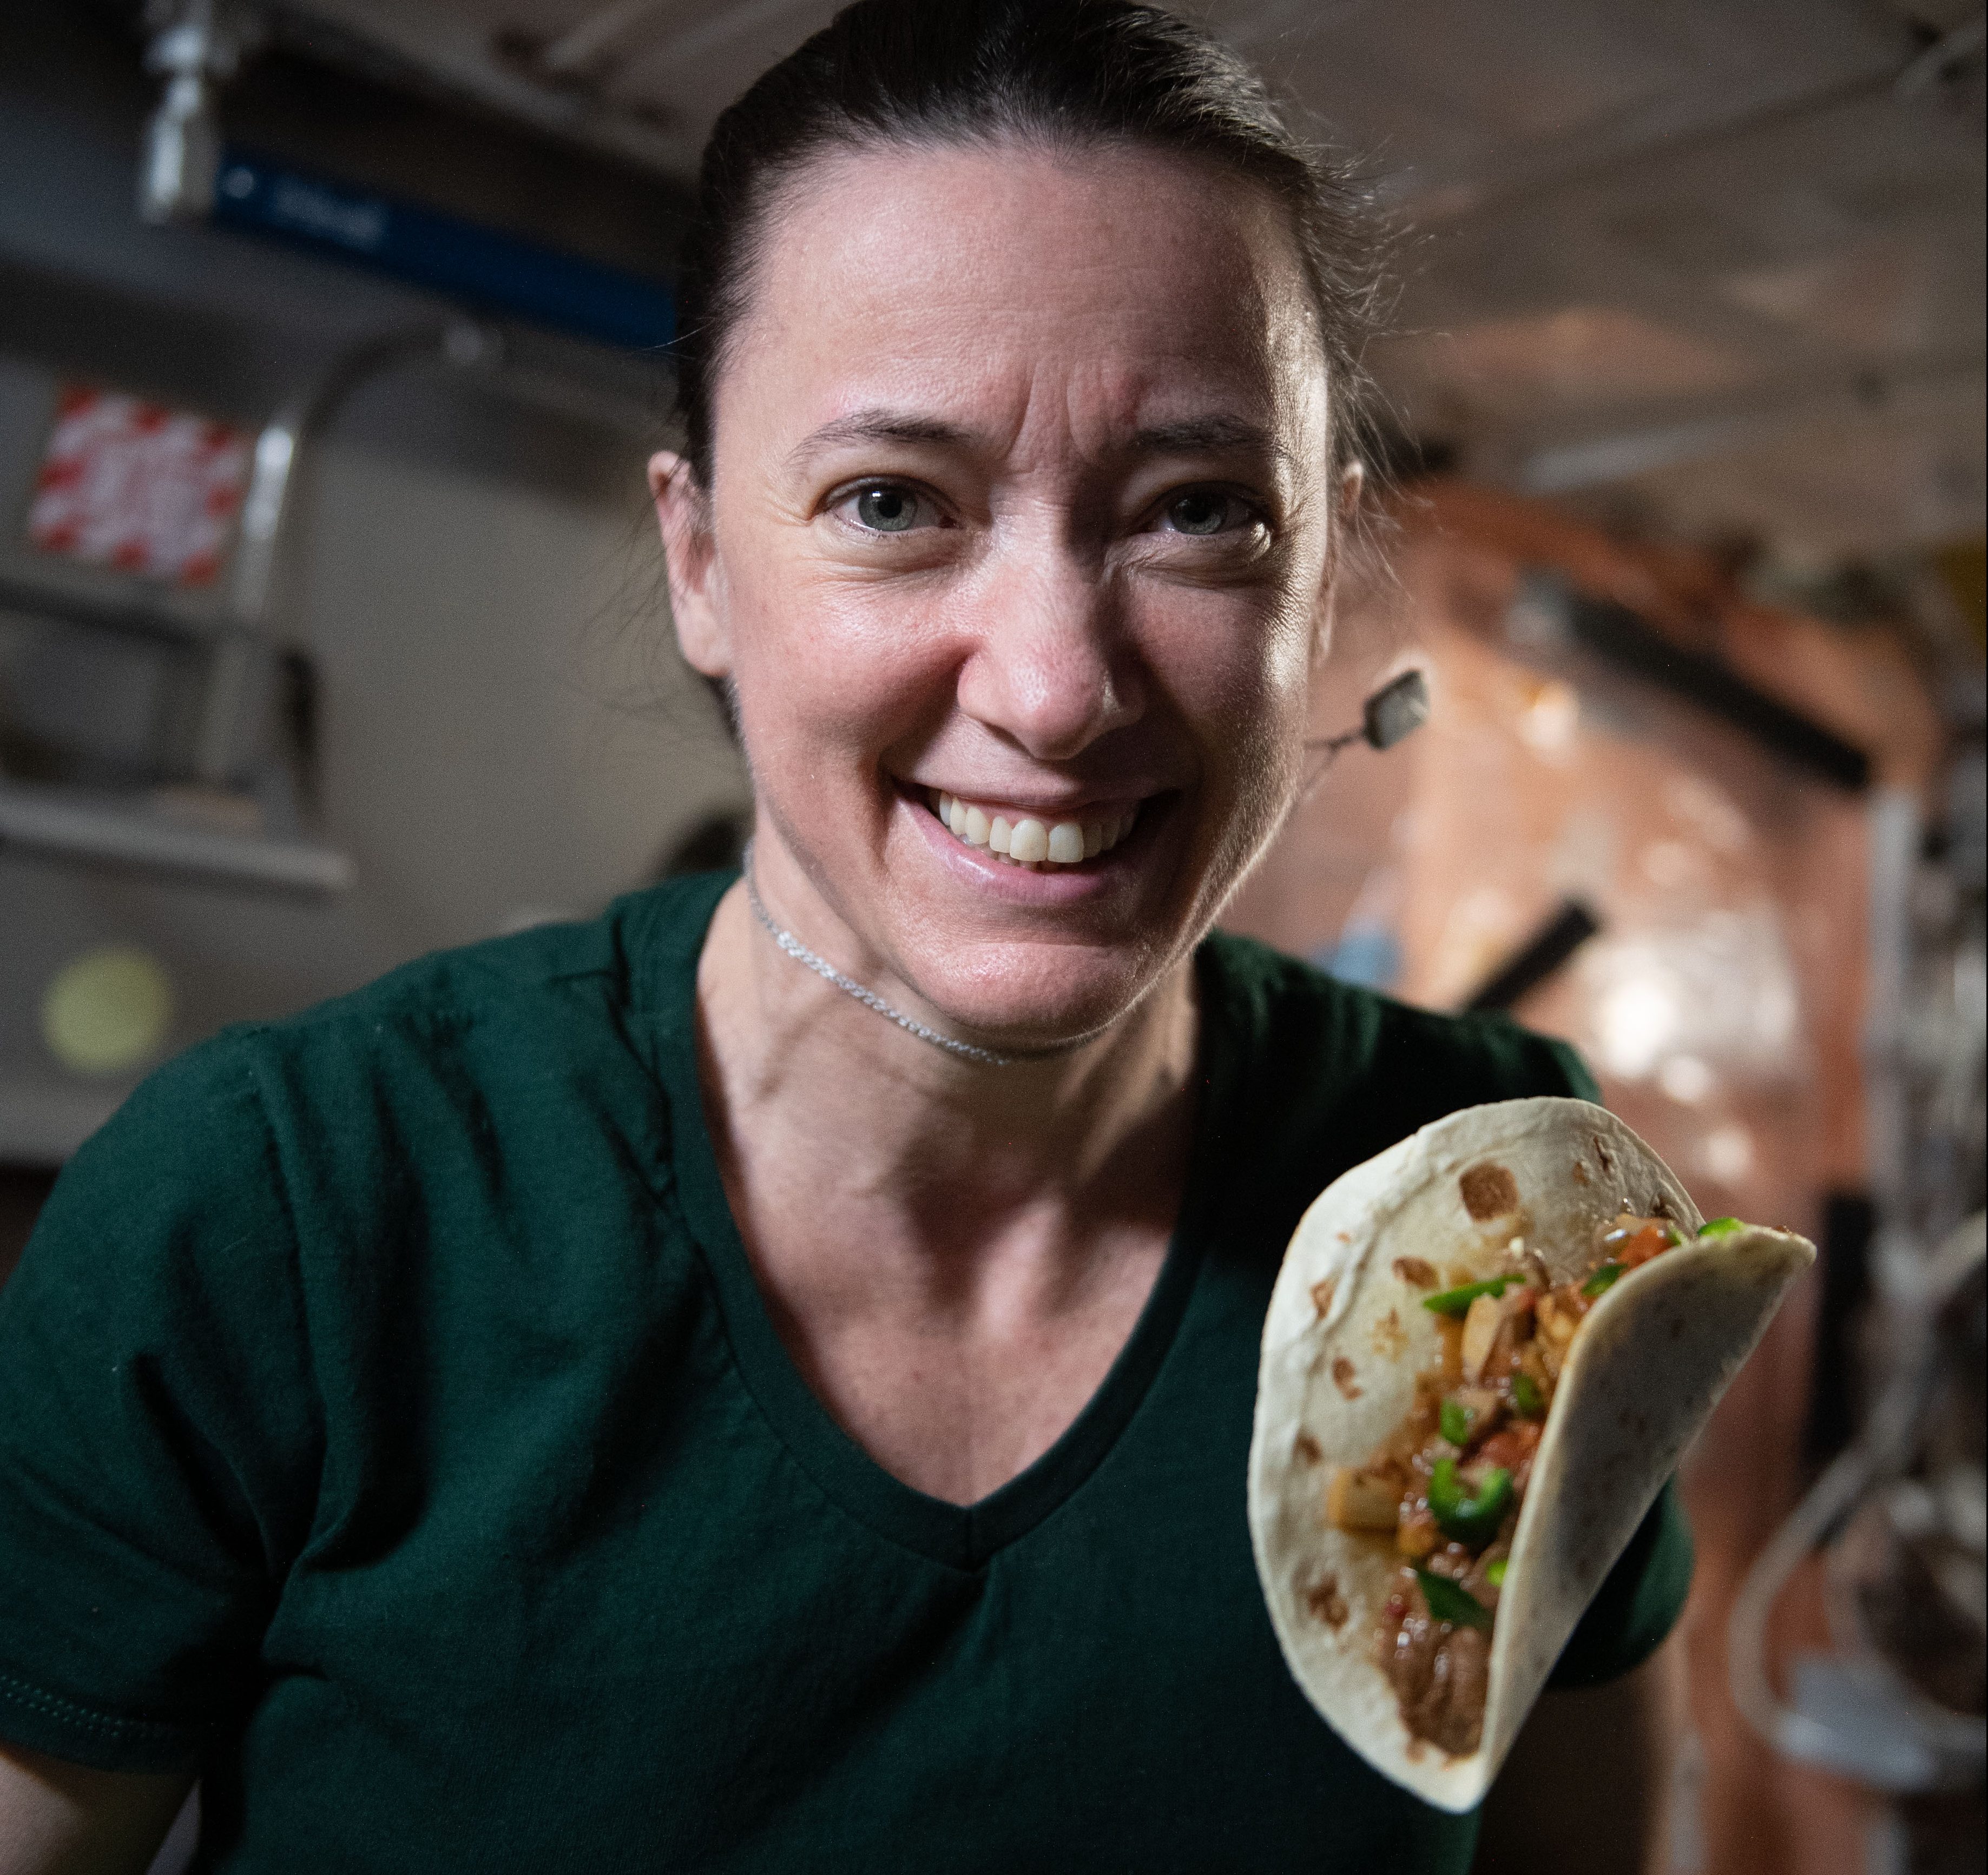 iss066e023198 (October 29, 2021) -- NASA astronaut and Expedition 66 flight engineer Megan McArthur is seen with a taco made using fajita beef, rehydrated tomatoes and artichokes, and chile peppers. The chile peppers were grown as part of the Plant Habitat-04 investigation aboard the International Space Station. The crop started growing on July 12, 2021, and represent one of the longest and most challenging plant experiments attempted aboard the orbiting laboratory. The chile peppers started growing on July 12, 2021, and represent one of the longest and most challenging plant experiments attempted aboard the orbiting laboratory. NASA astronaut and Expedition 66 flight engineer Mark Vande Hei conducted the first harvest of the pepper crop on October 29, 2021. Crew members sanitized the peppers and completed a scientific survey after their taste test. The Crew-3 astronauts will take over the crop when they arrive at the orbiting laboratory, and will conduct a final harvest of the peppers in late November. They will also sanitize and sample the crop, and complete surveys. Some peppers and their leaves from the final harvest will return to Earth for further analysis. What we learn will inform future crop growth and food supplementation activities for deep space exploration.